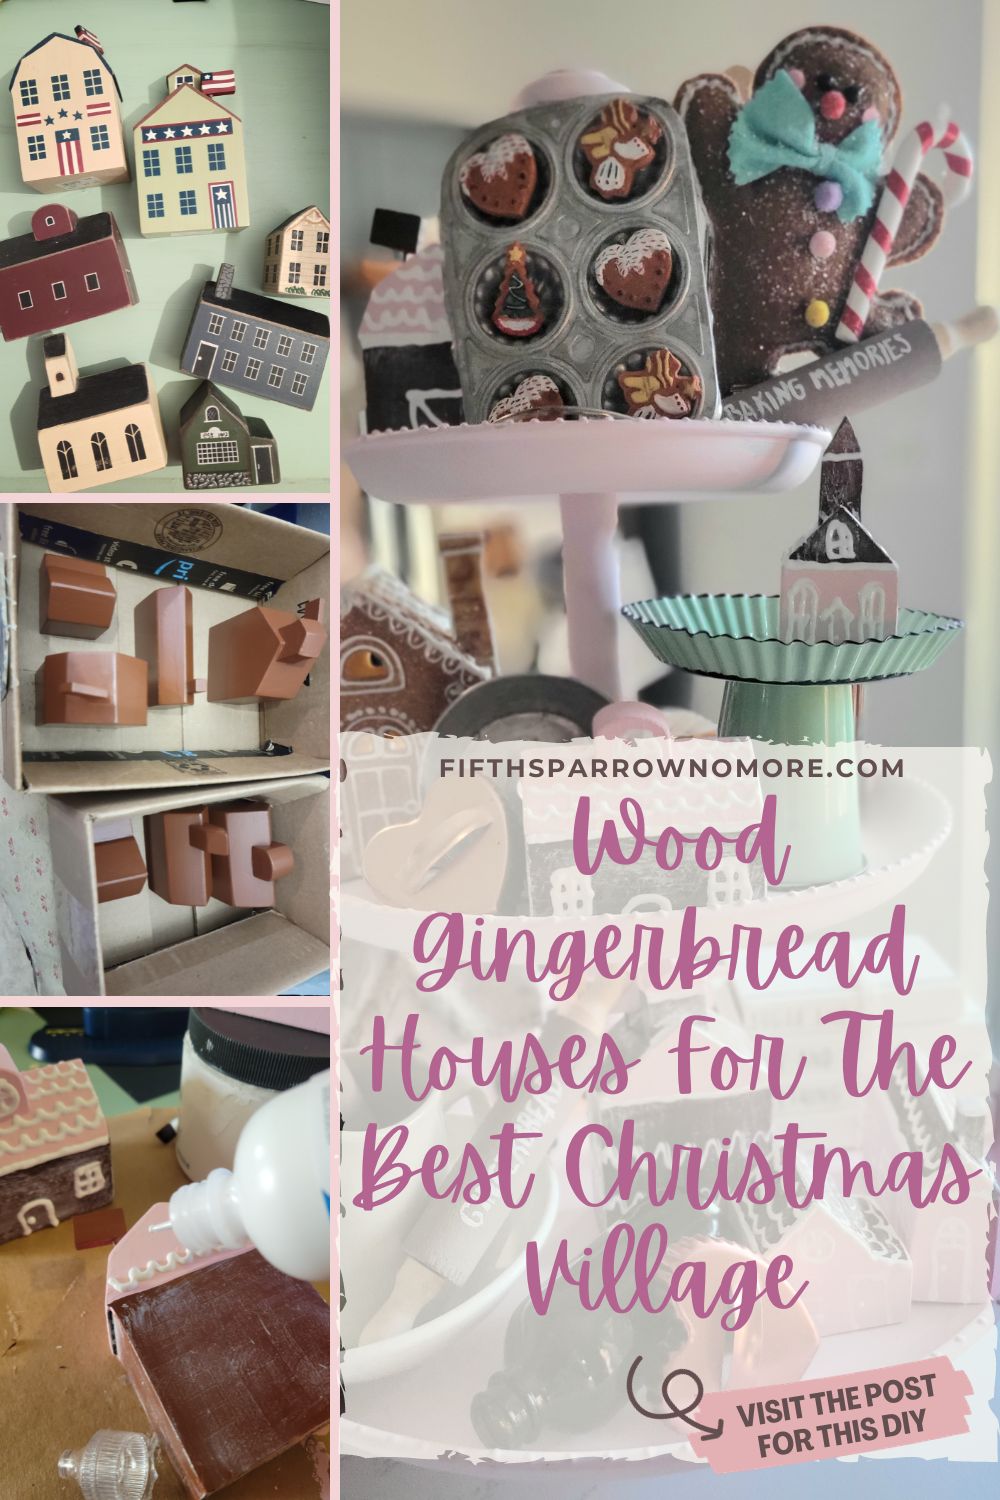 Decorate with a gingerbread theme this holiday season - make wood gingerbread houses for the best Christmas village display.